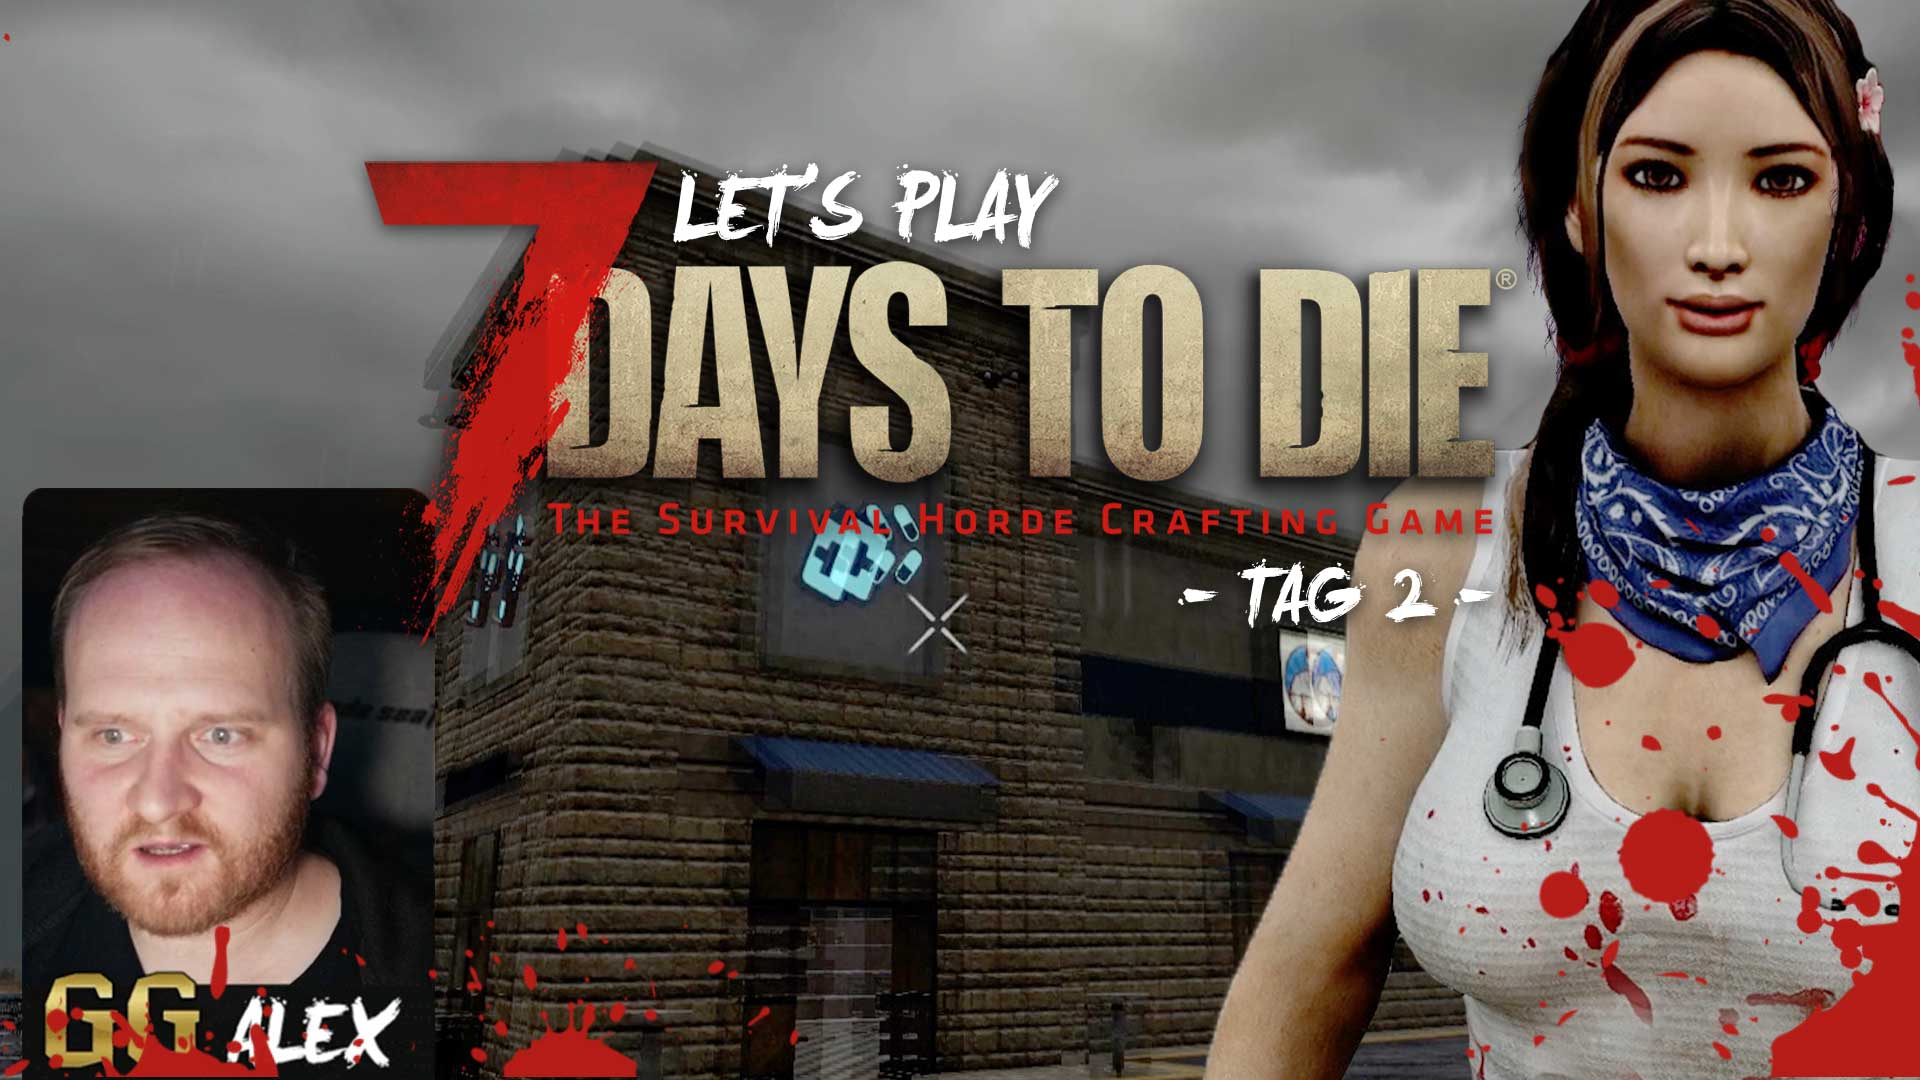 lets play 7 days to die tag 2 GG v2